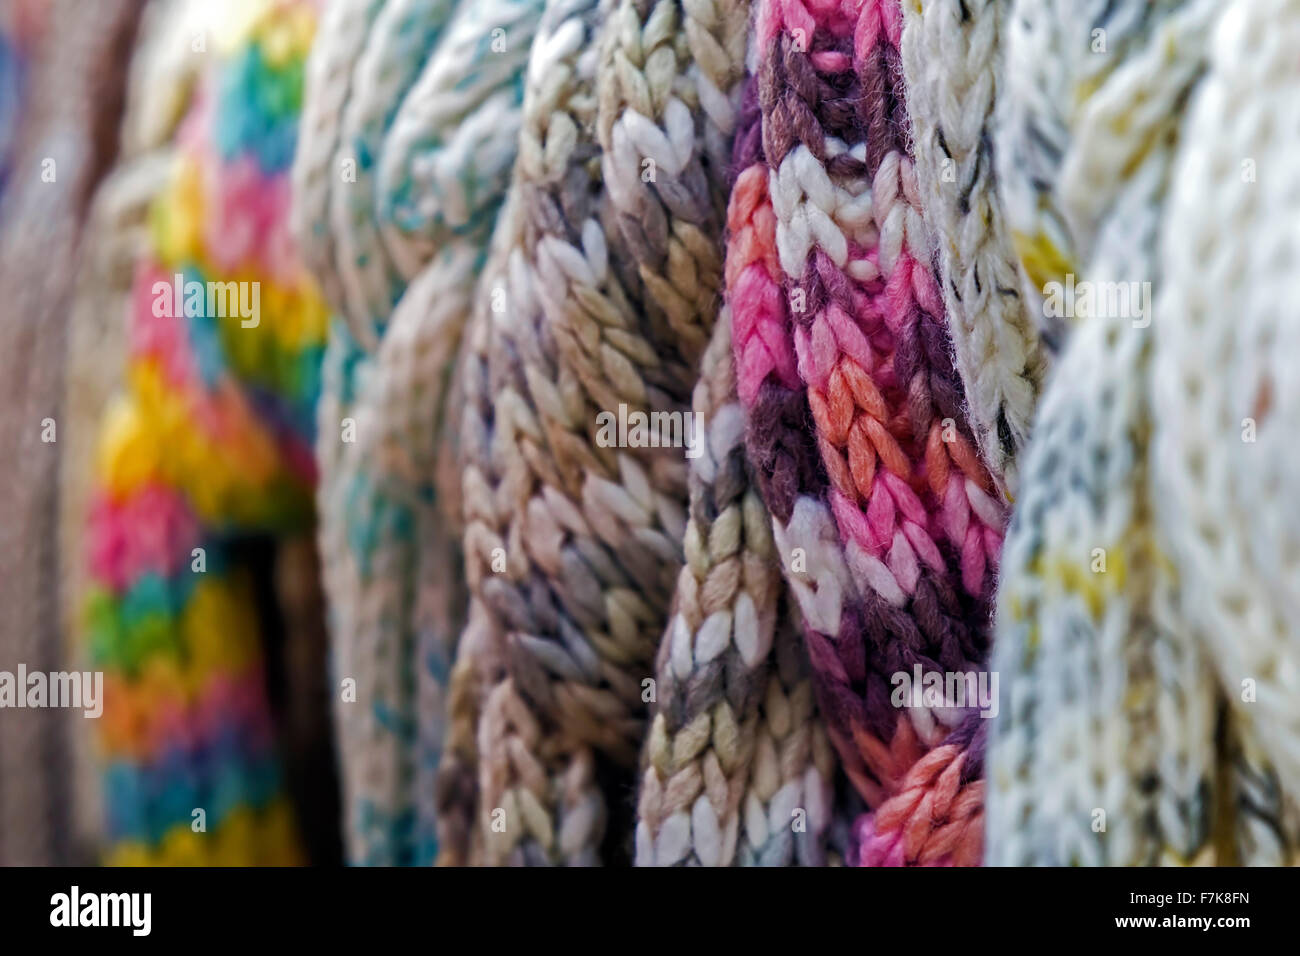 Wool scarves of various colors, exposed for sale. Stock Photo